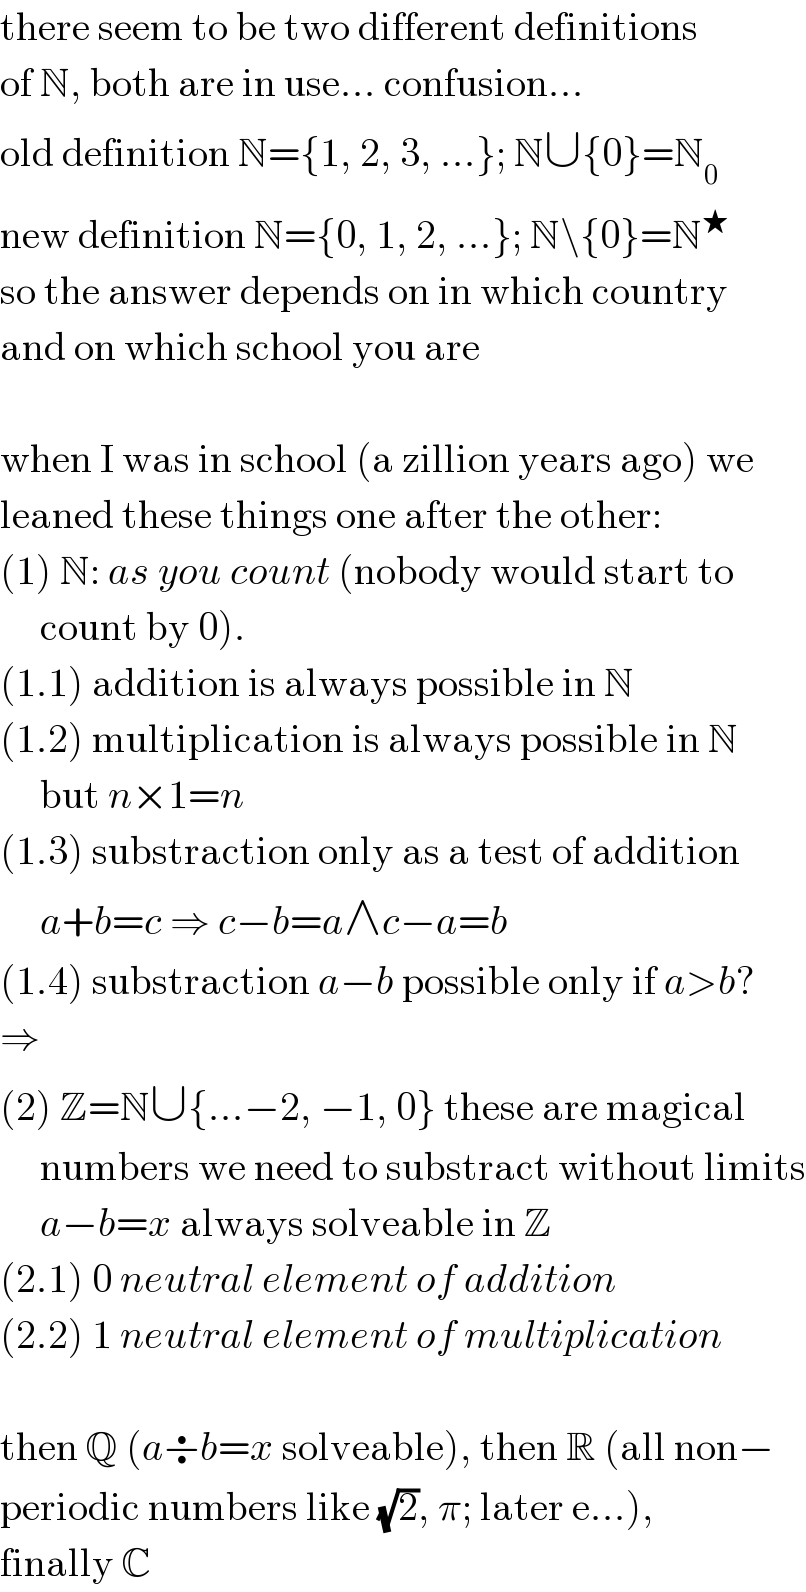 there seem to be two different definitions  of N, both are in use... confusion...  old definition N={1, 2, 3, ...}; N∪{0}=N_0   new definition N={0, 1, 2, ...}; N\{0}=N^★   so the answer depends on in which country  and on which school you are    when I was in school (a zillion years ago) we  leaned these things one after the other:  (1) N: as you count (nobody would start to       count by 0).  (1.1) addition is always possible in N  (1.2) multiplication is always possible in N       but n×1=n  (1.3) substraction only as a test of addition       a+b=c ⇒ c−b=a∧c−a=b  (1.4) substraction a−b possible only if a>b?  ⇒  (2) Z=N∪{...−2, −1, 0} these are magical       numbers we need to substract without limits       a−b=x always solveable in Z  (2.1) 0 neutral element of addition  (2.2) 1 neutral element of multiplication    then Q (a÷b=x solveable), then R (all non−  periodic numbers like (√2), π; later e...),  finally C  